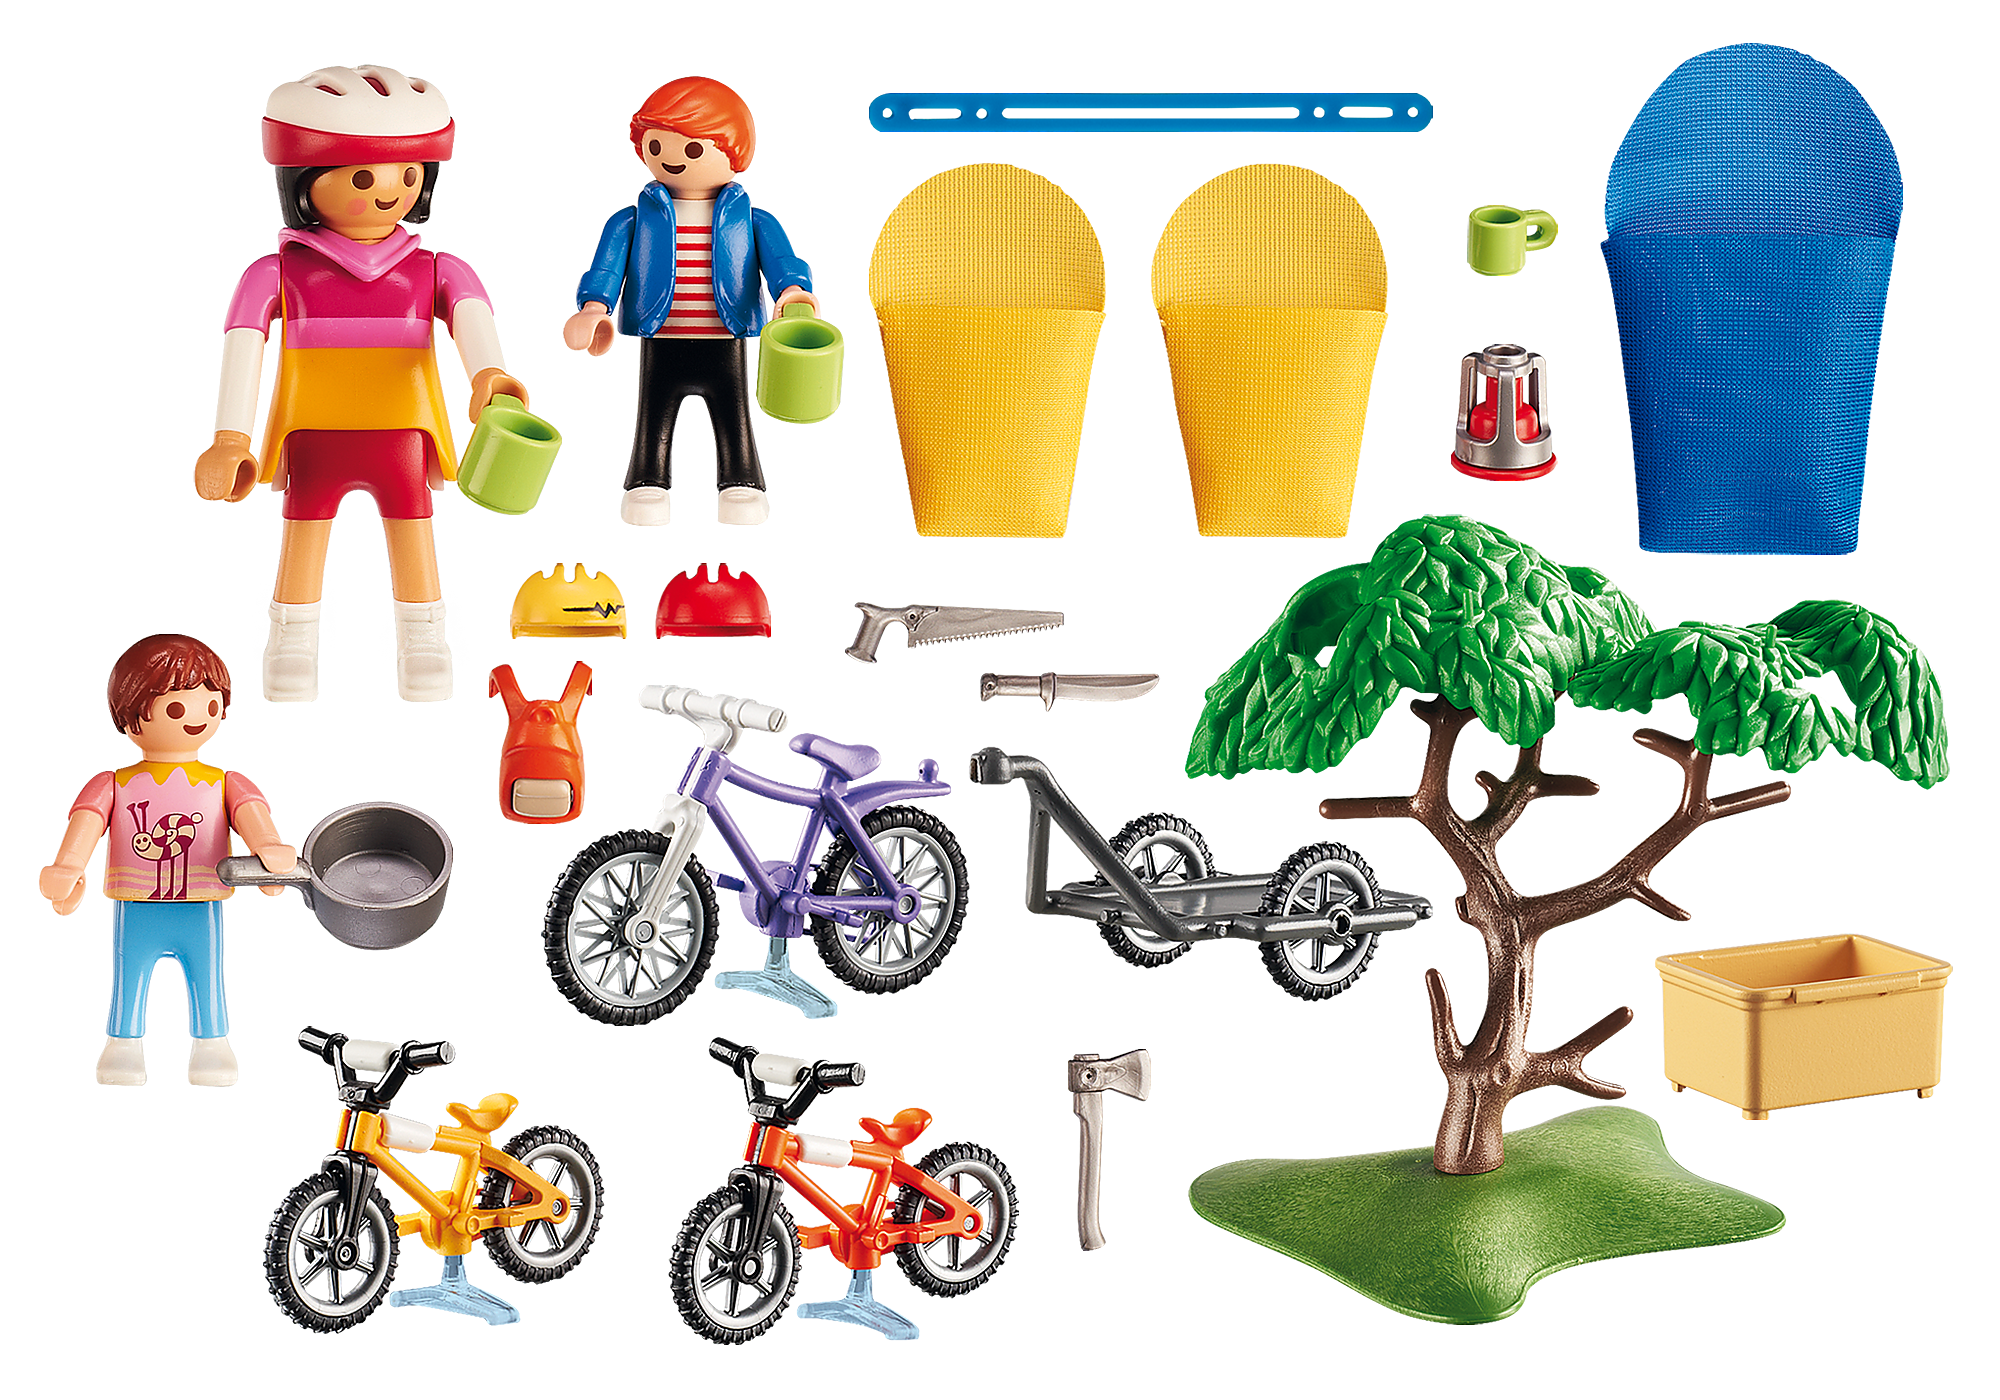  Playmobil - Bicycle Excursion : Toys & Games